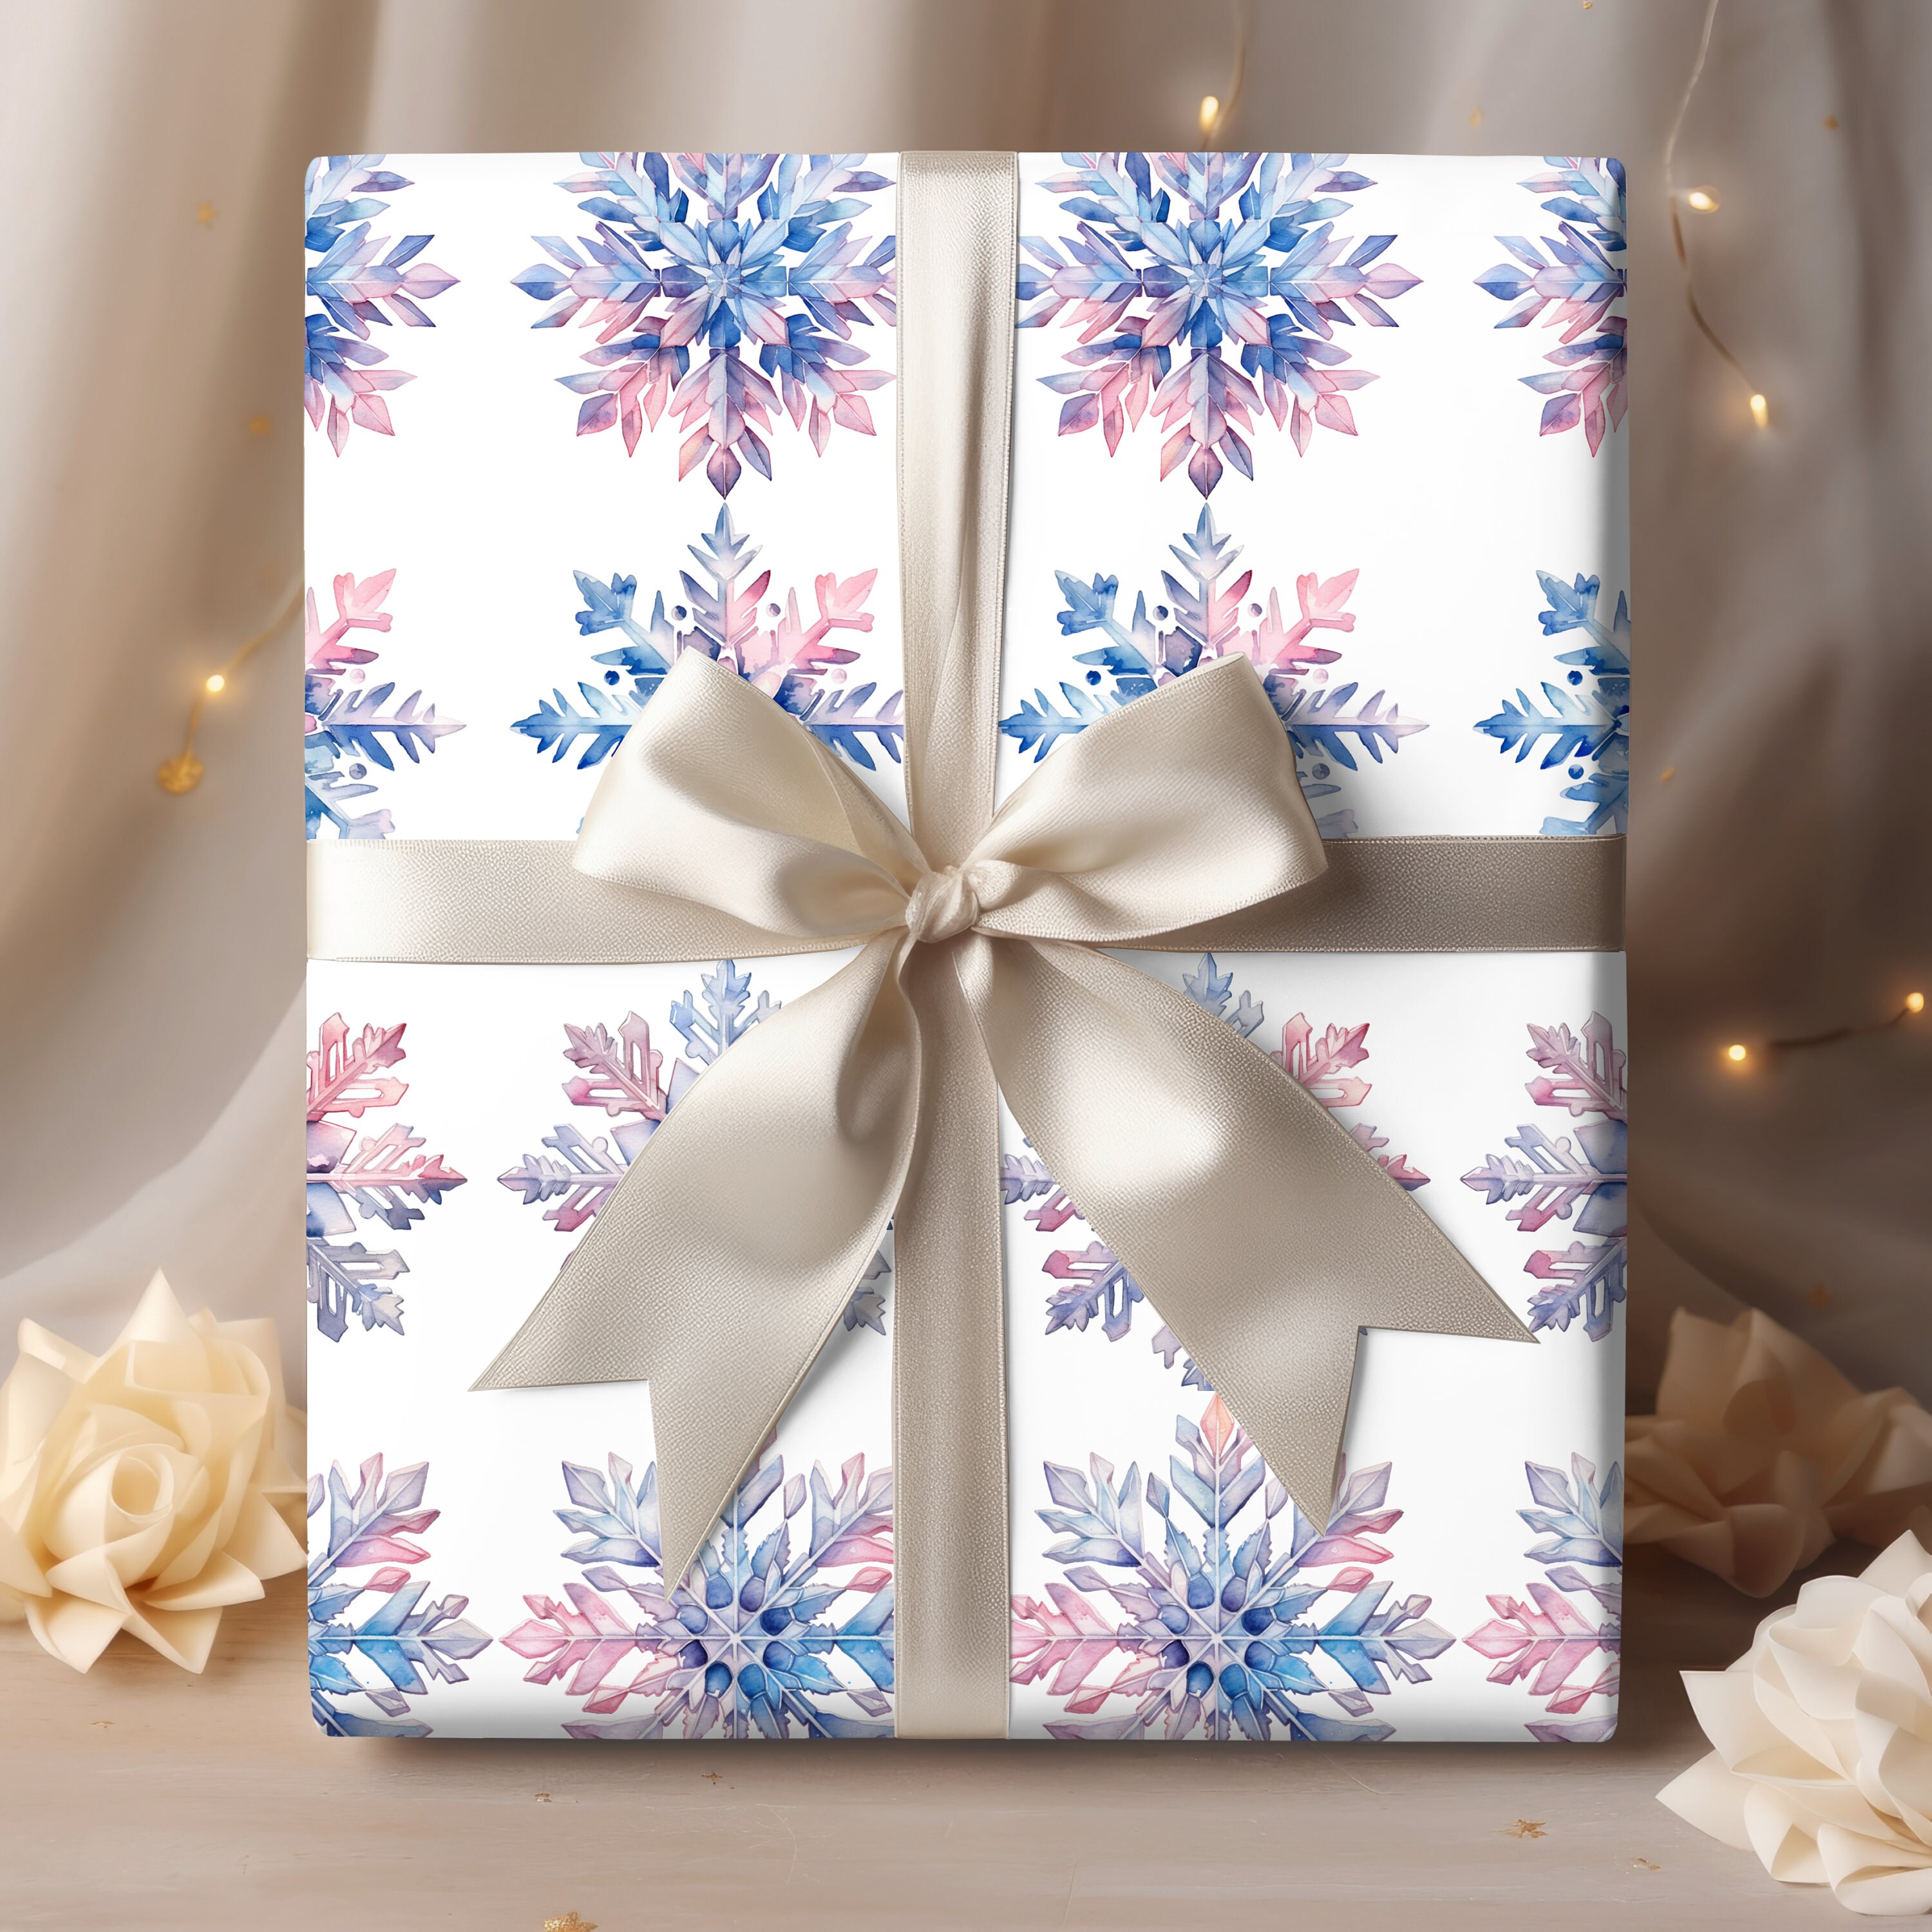 Retro Snowflakes Aqua/turquoise and Cream Gift Wrap, Wrapping Paper,  Sustainable Matte or Satin, Retro Christmas, Vintage Holidays 